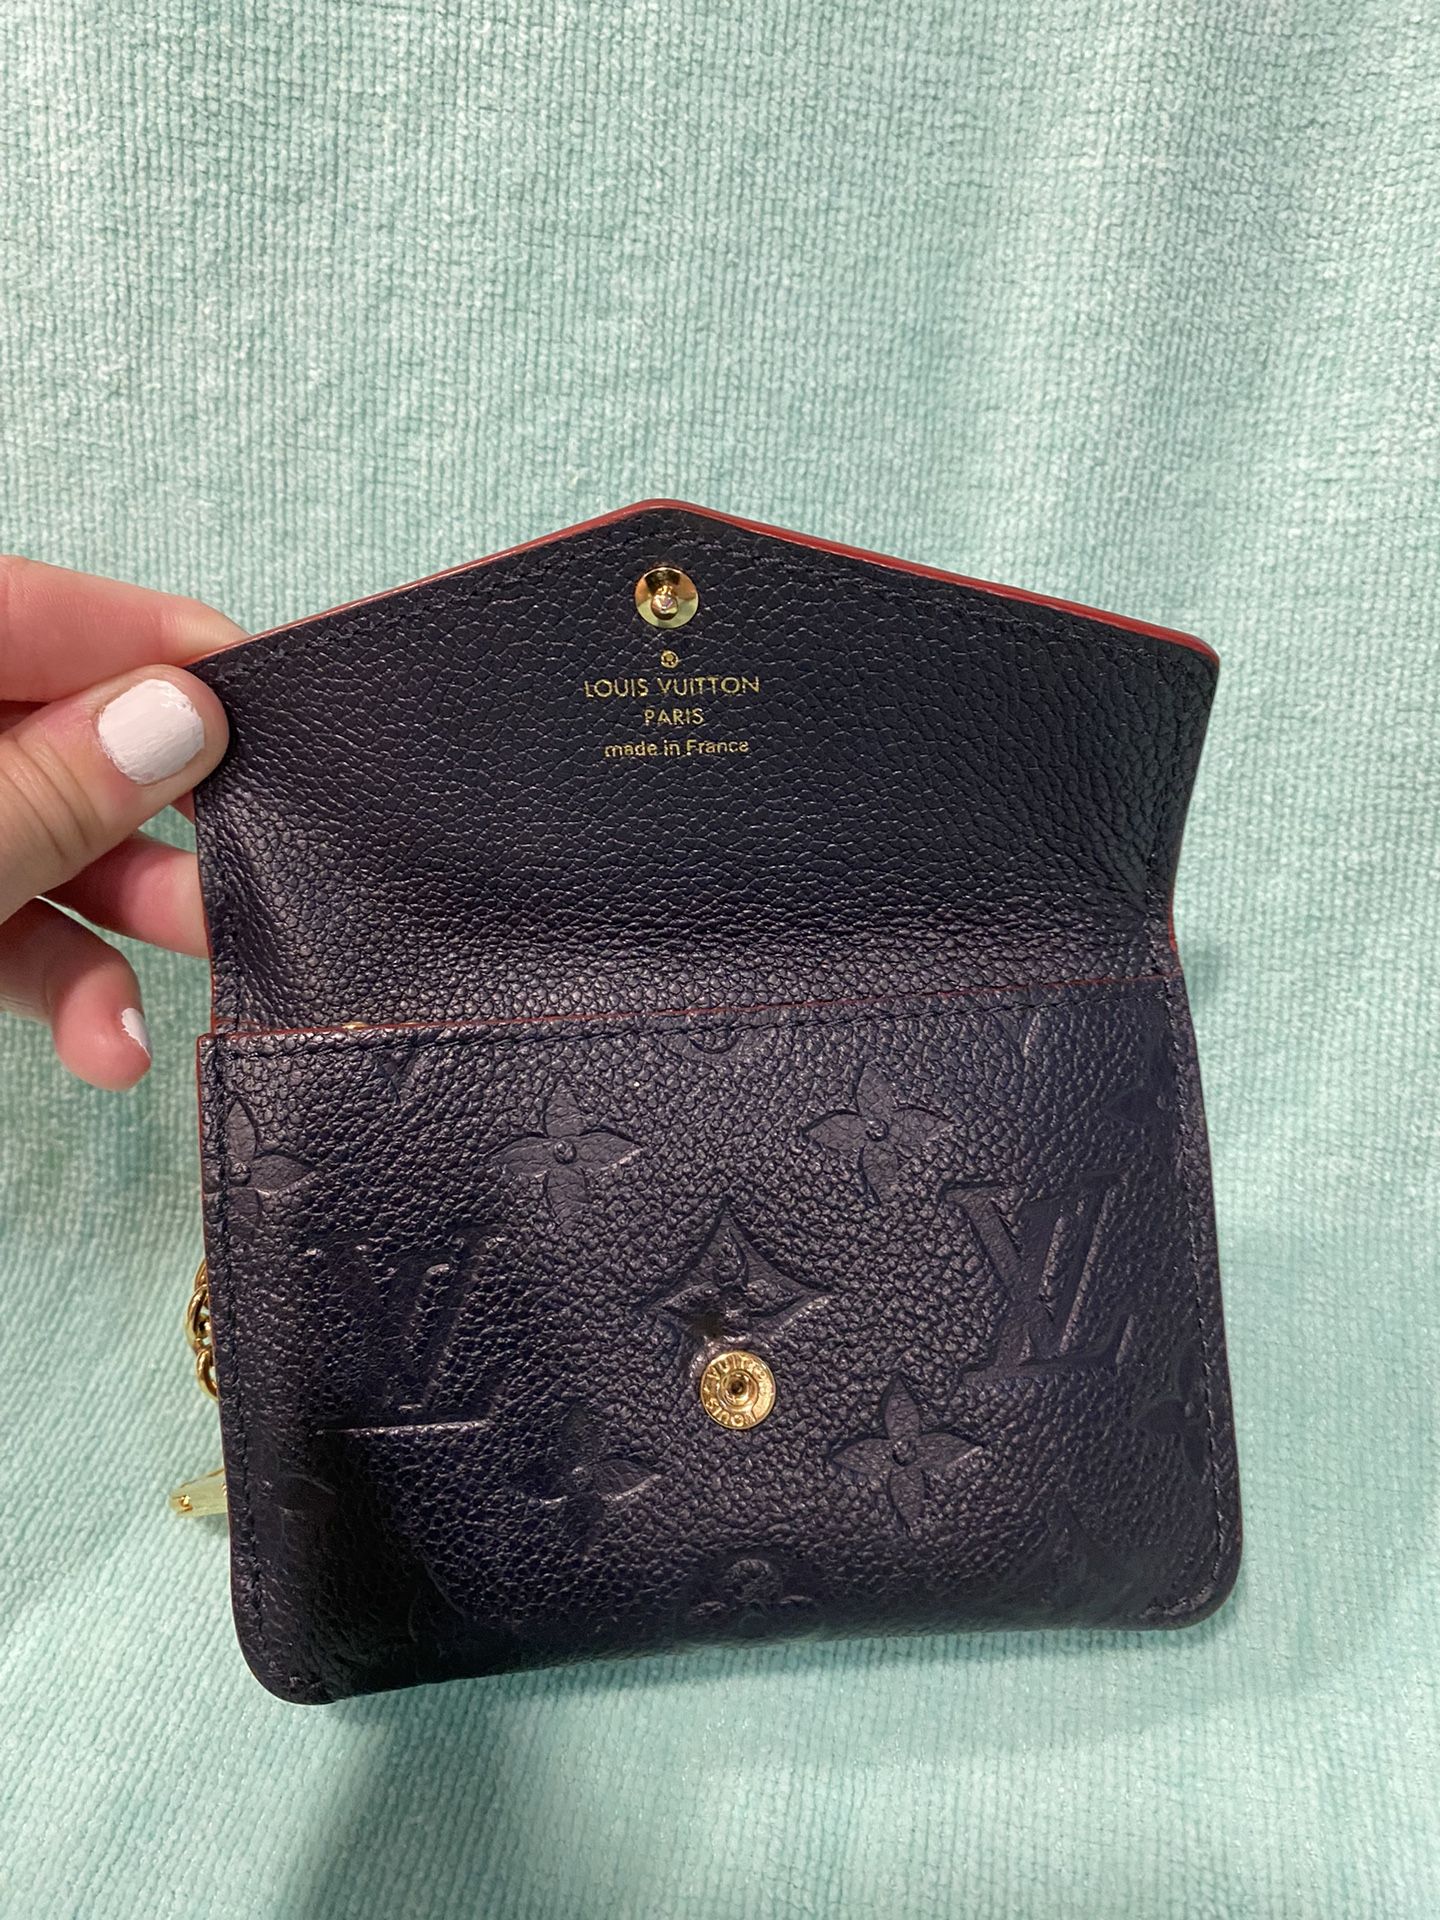 Louis Vuitton Style Monogram Shadow,material Leather for Sale in Fairfield,  CT - OfferUp